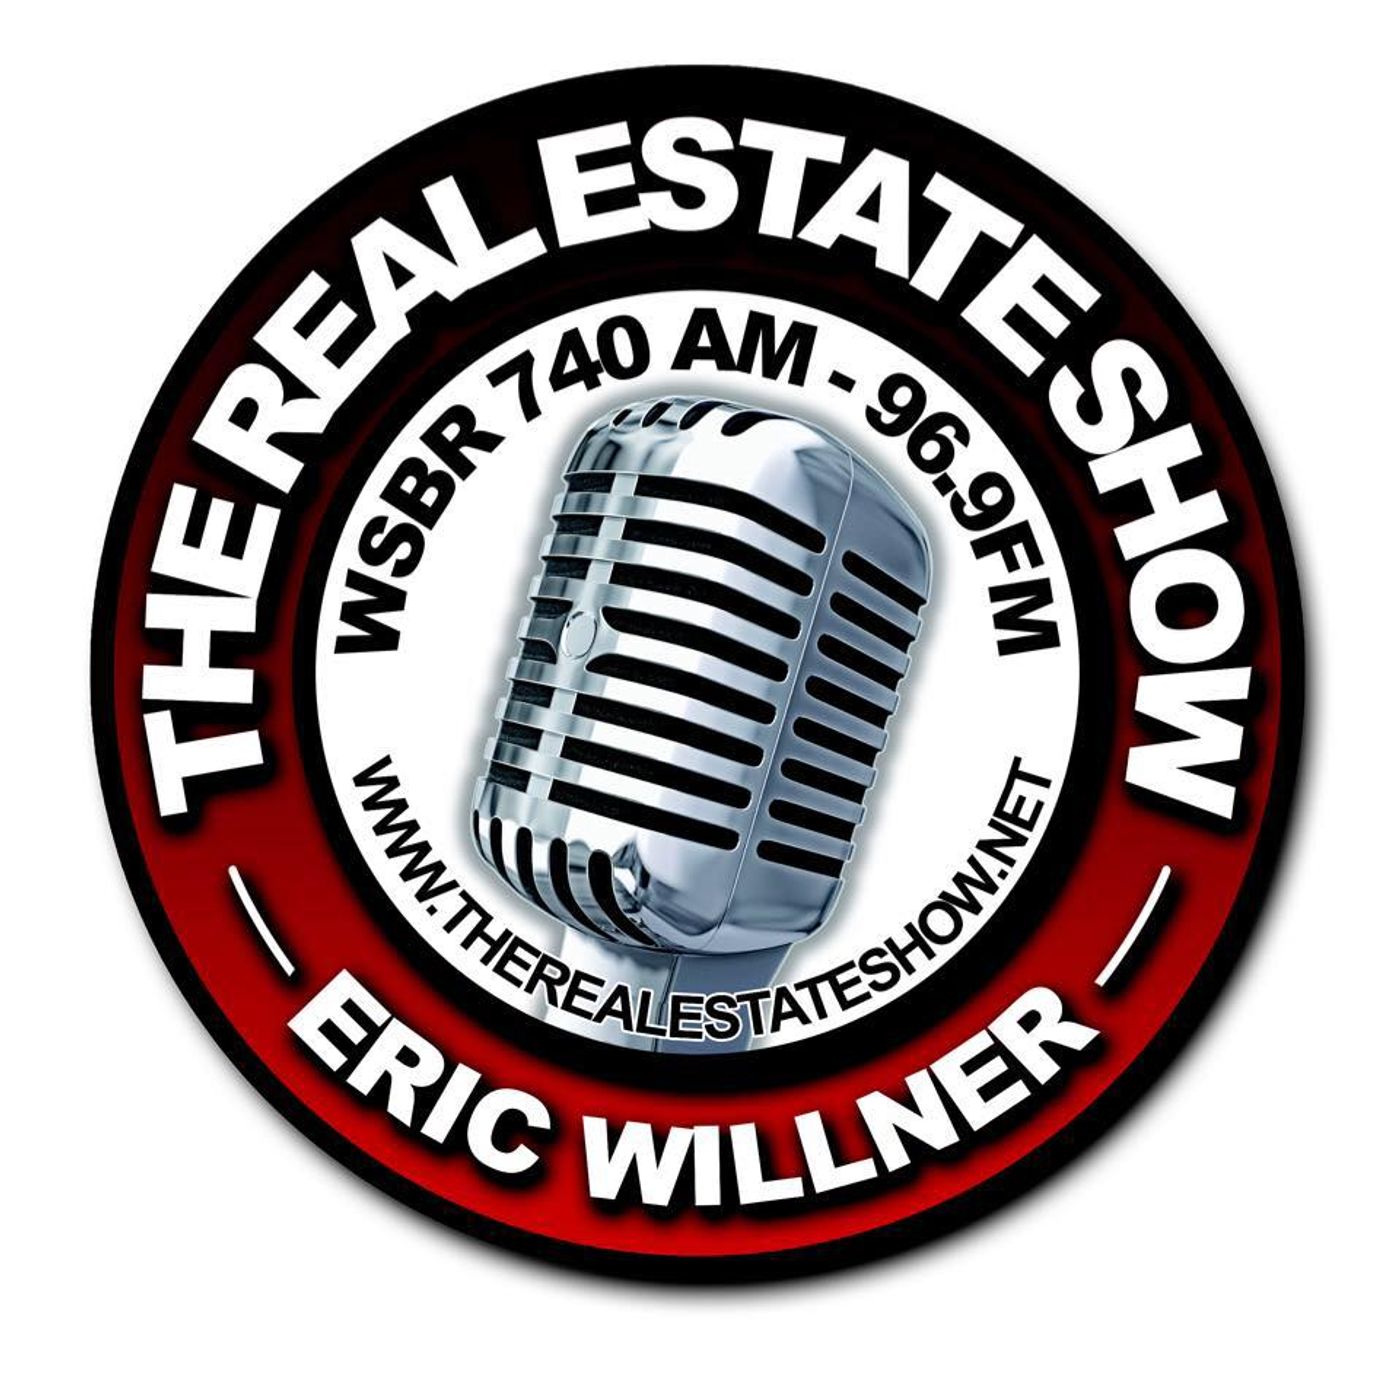 The Real Estate Show (Old)